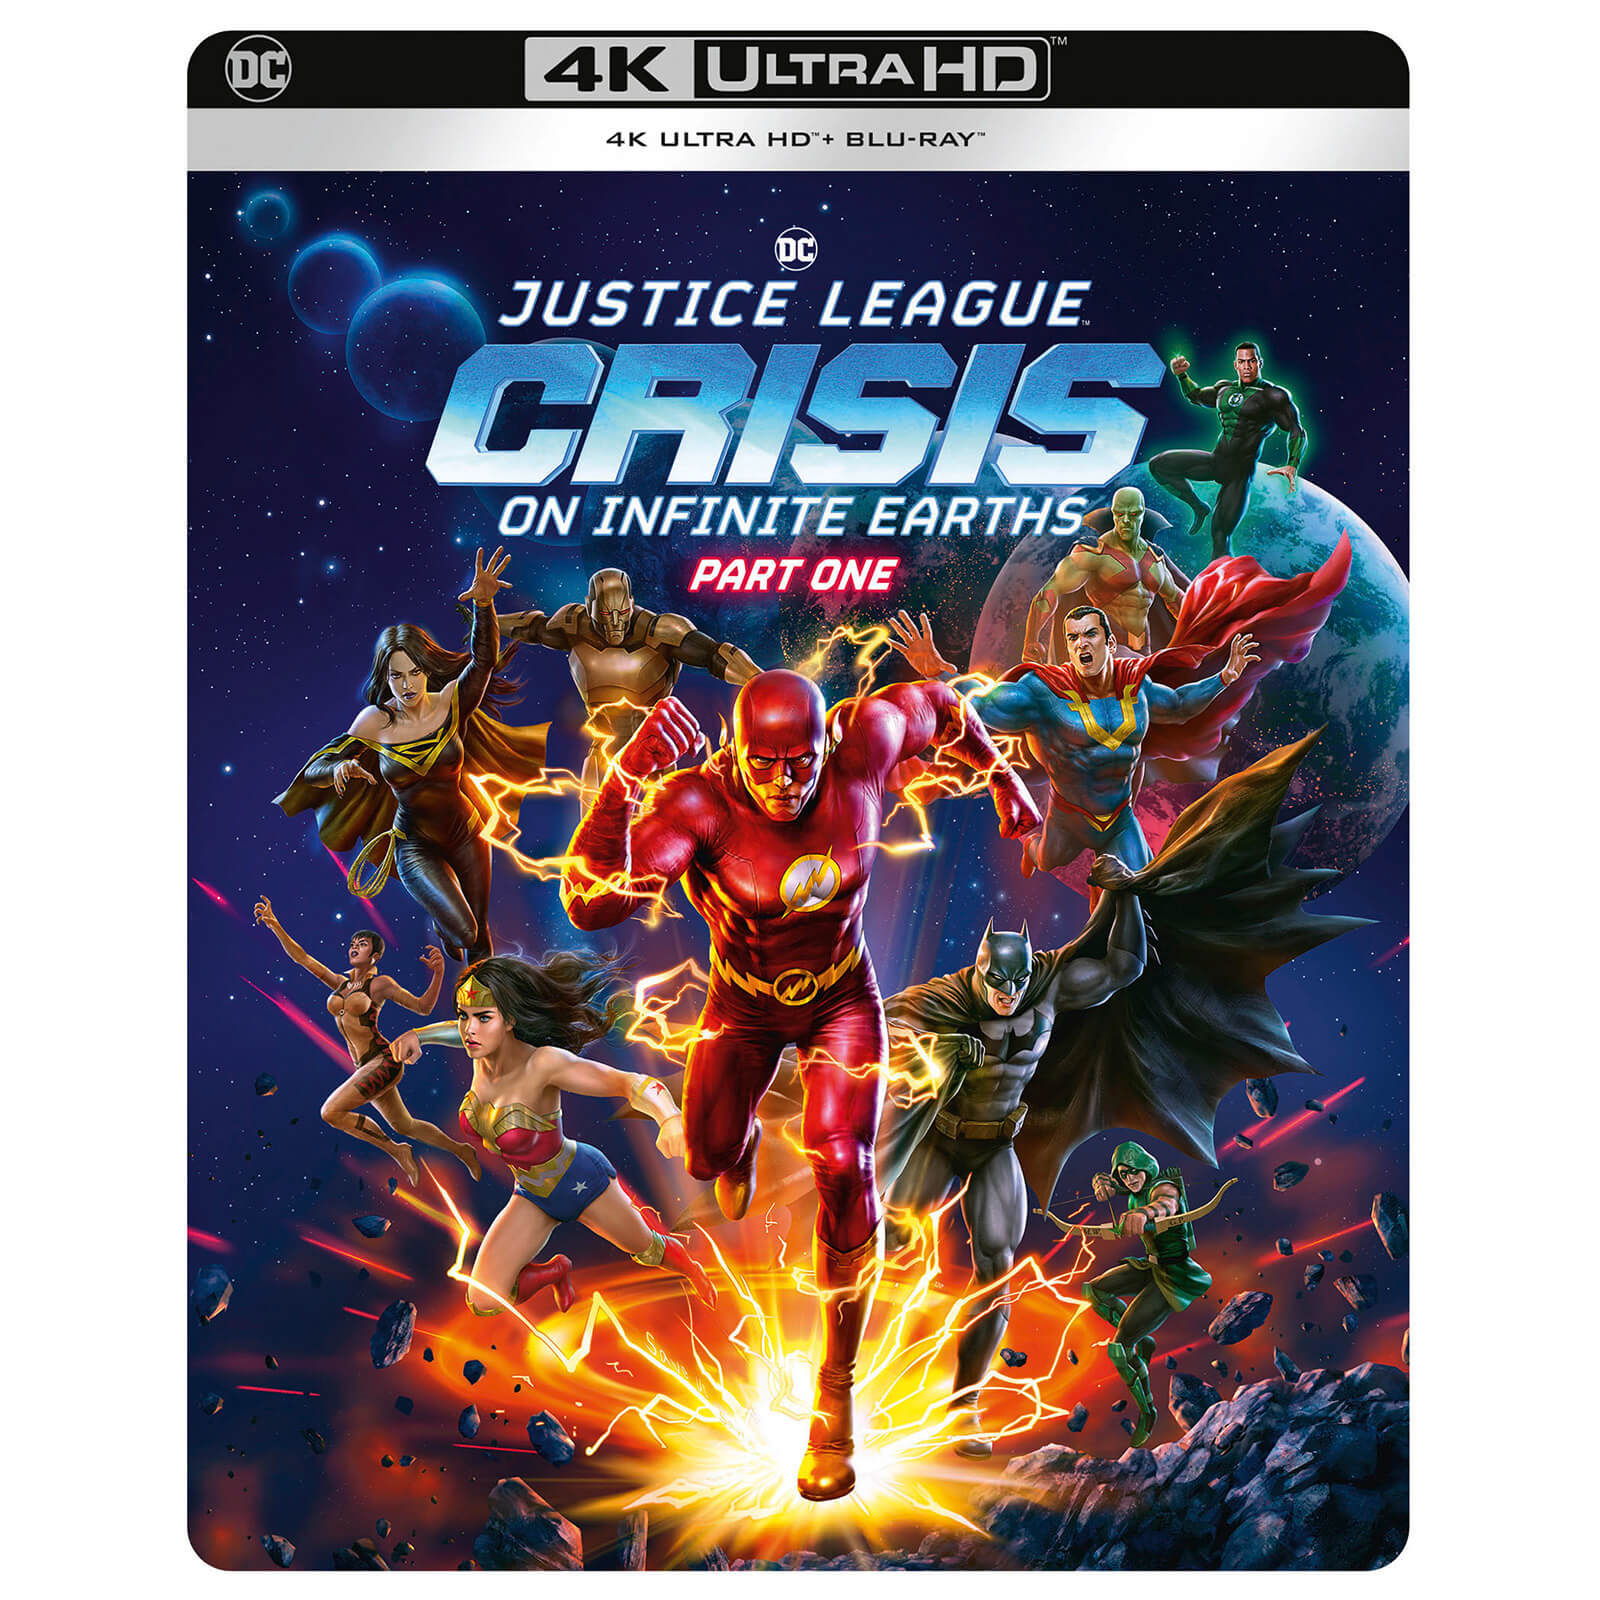 justice league: crisis on infinite earths - part 1 4k ultra hd steelbook (includes blu-ray)